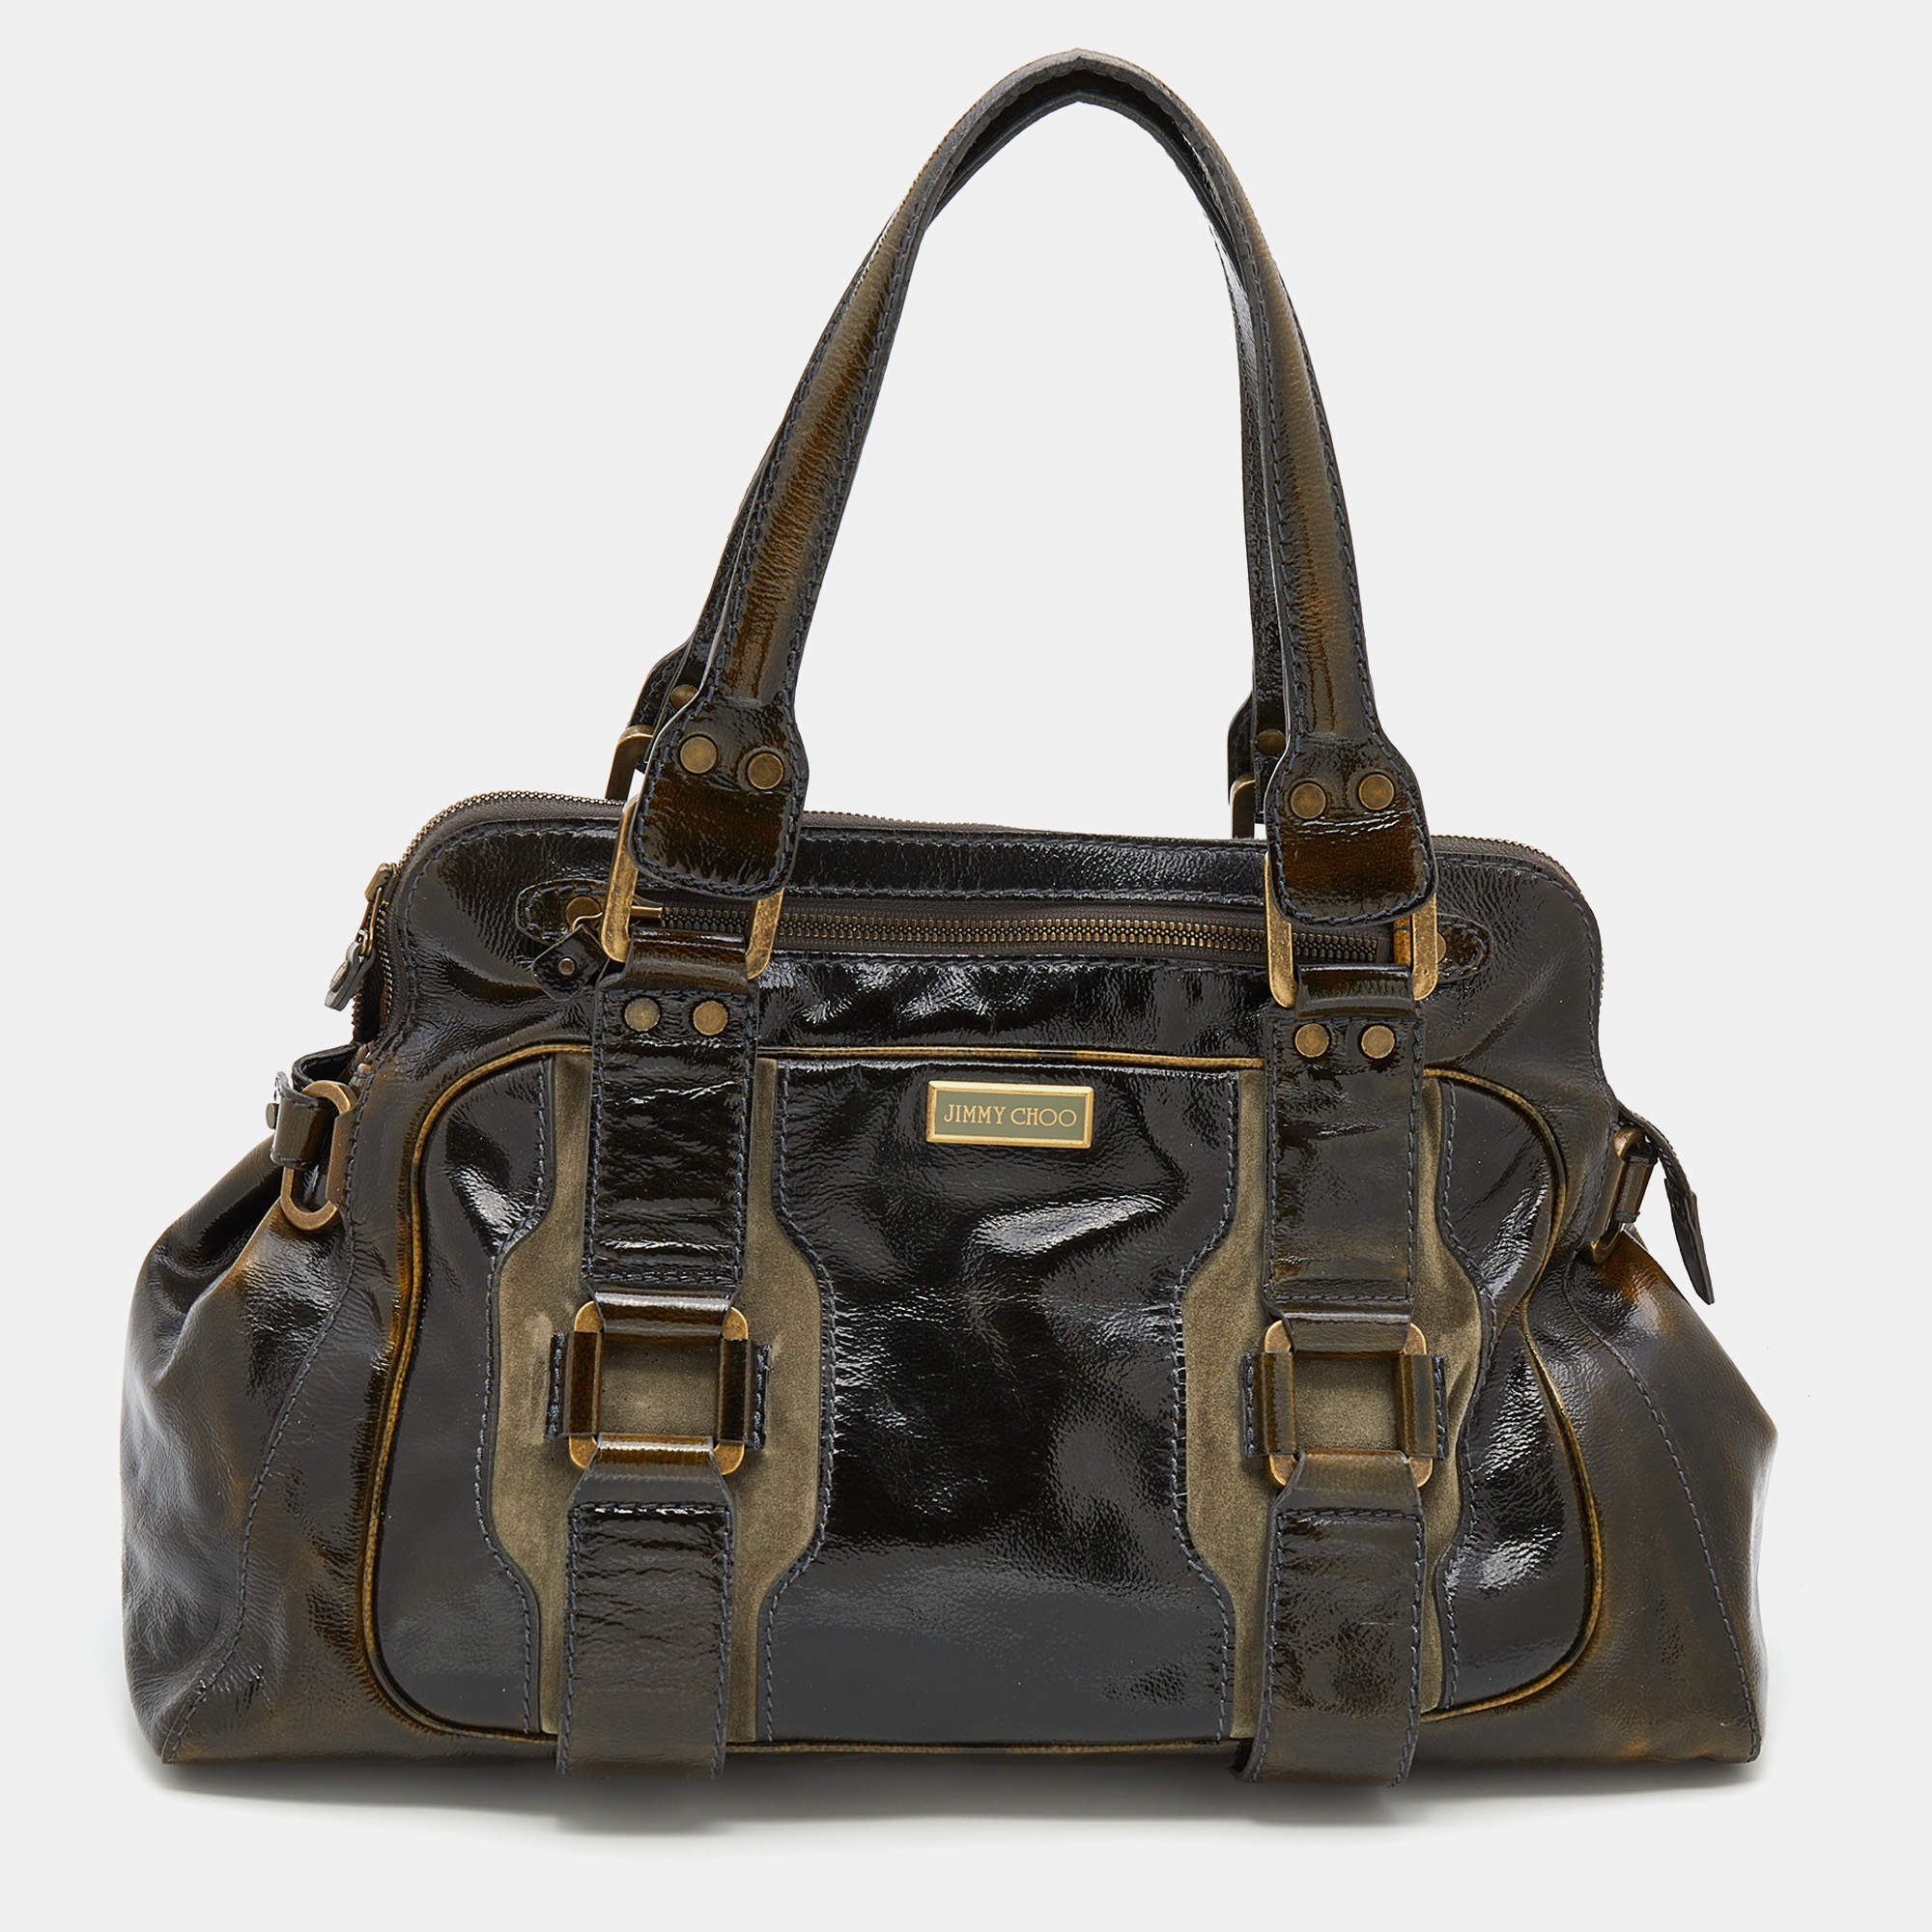 Jimmy Choo Dark Olive Patent Leather and Suede Malena Satchel